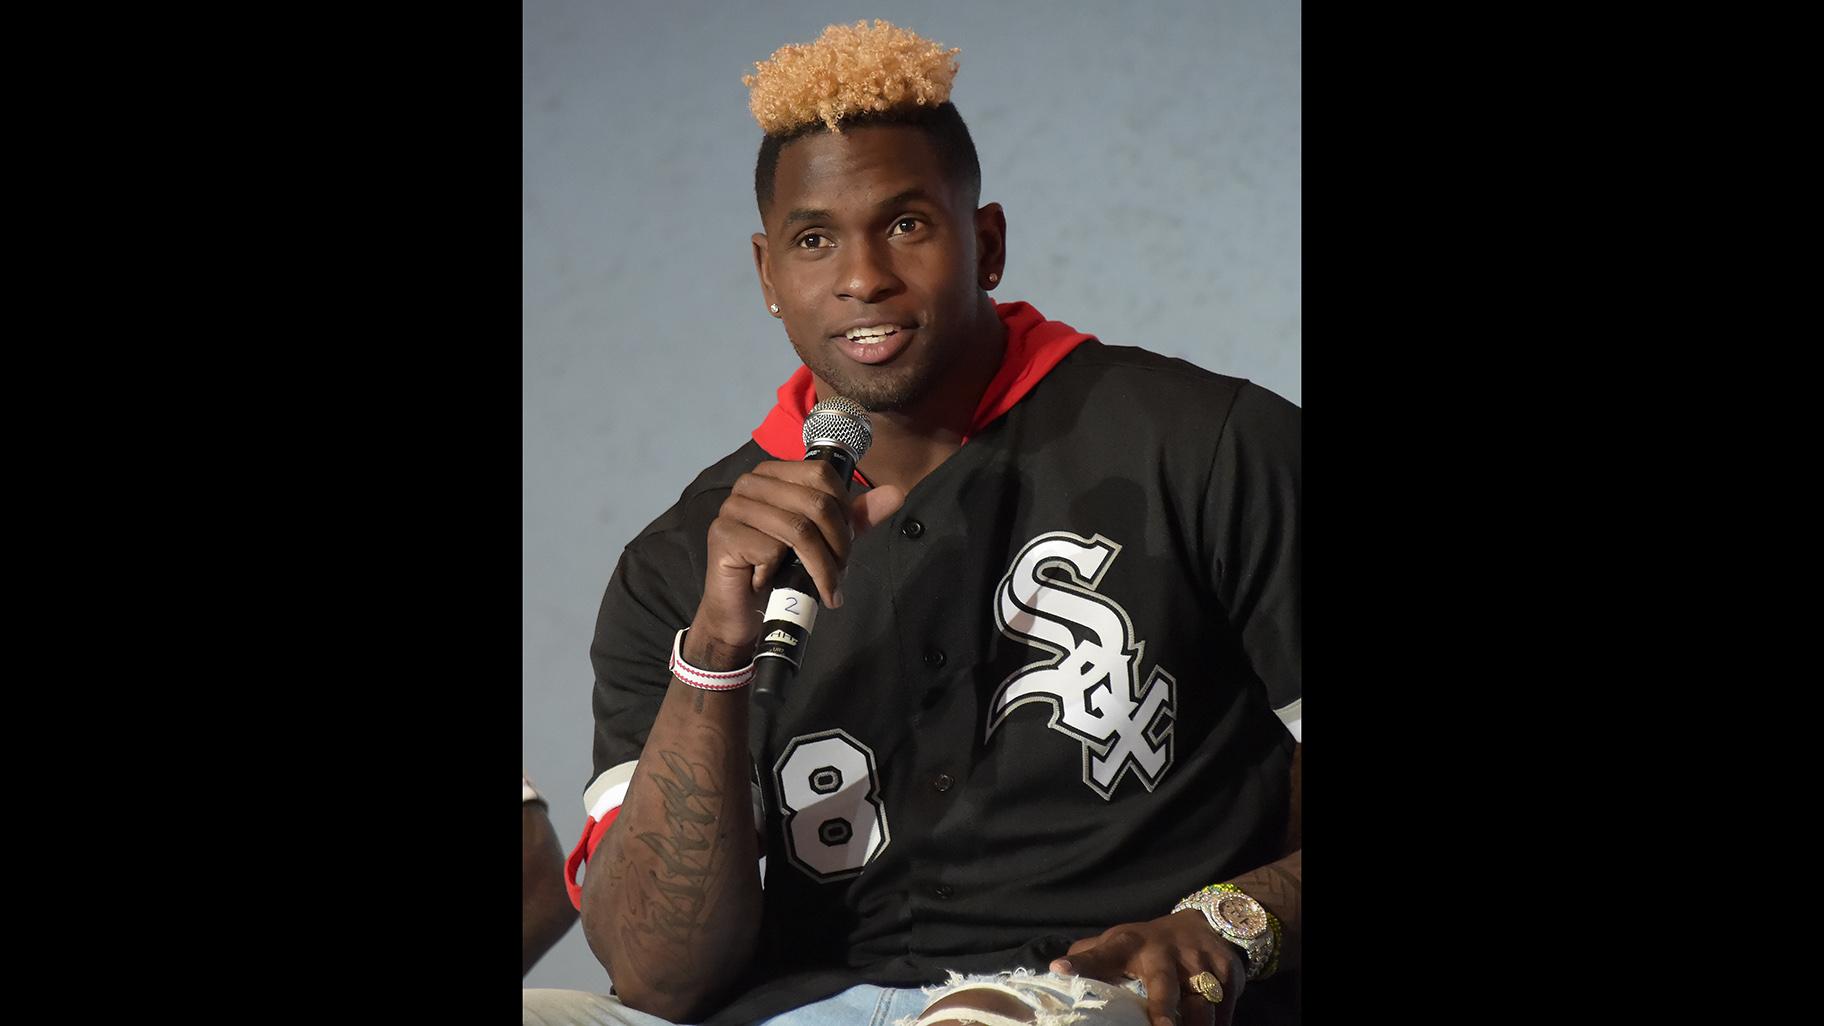 Caption: Sox rookie Luis Robert talks to fans at the recent SoxFest. (Courtesy Chicago White Sox / Ron Vesely)